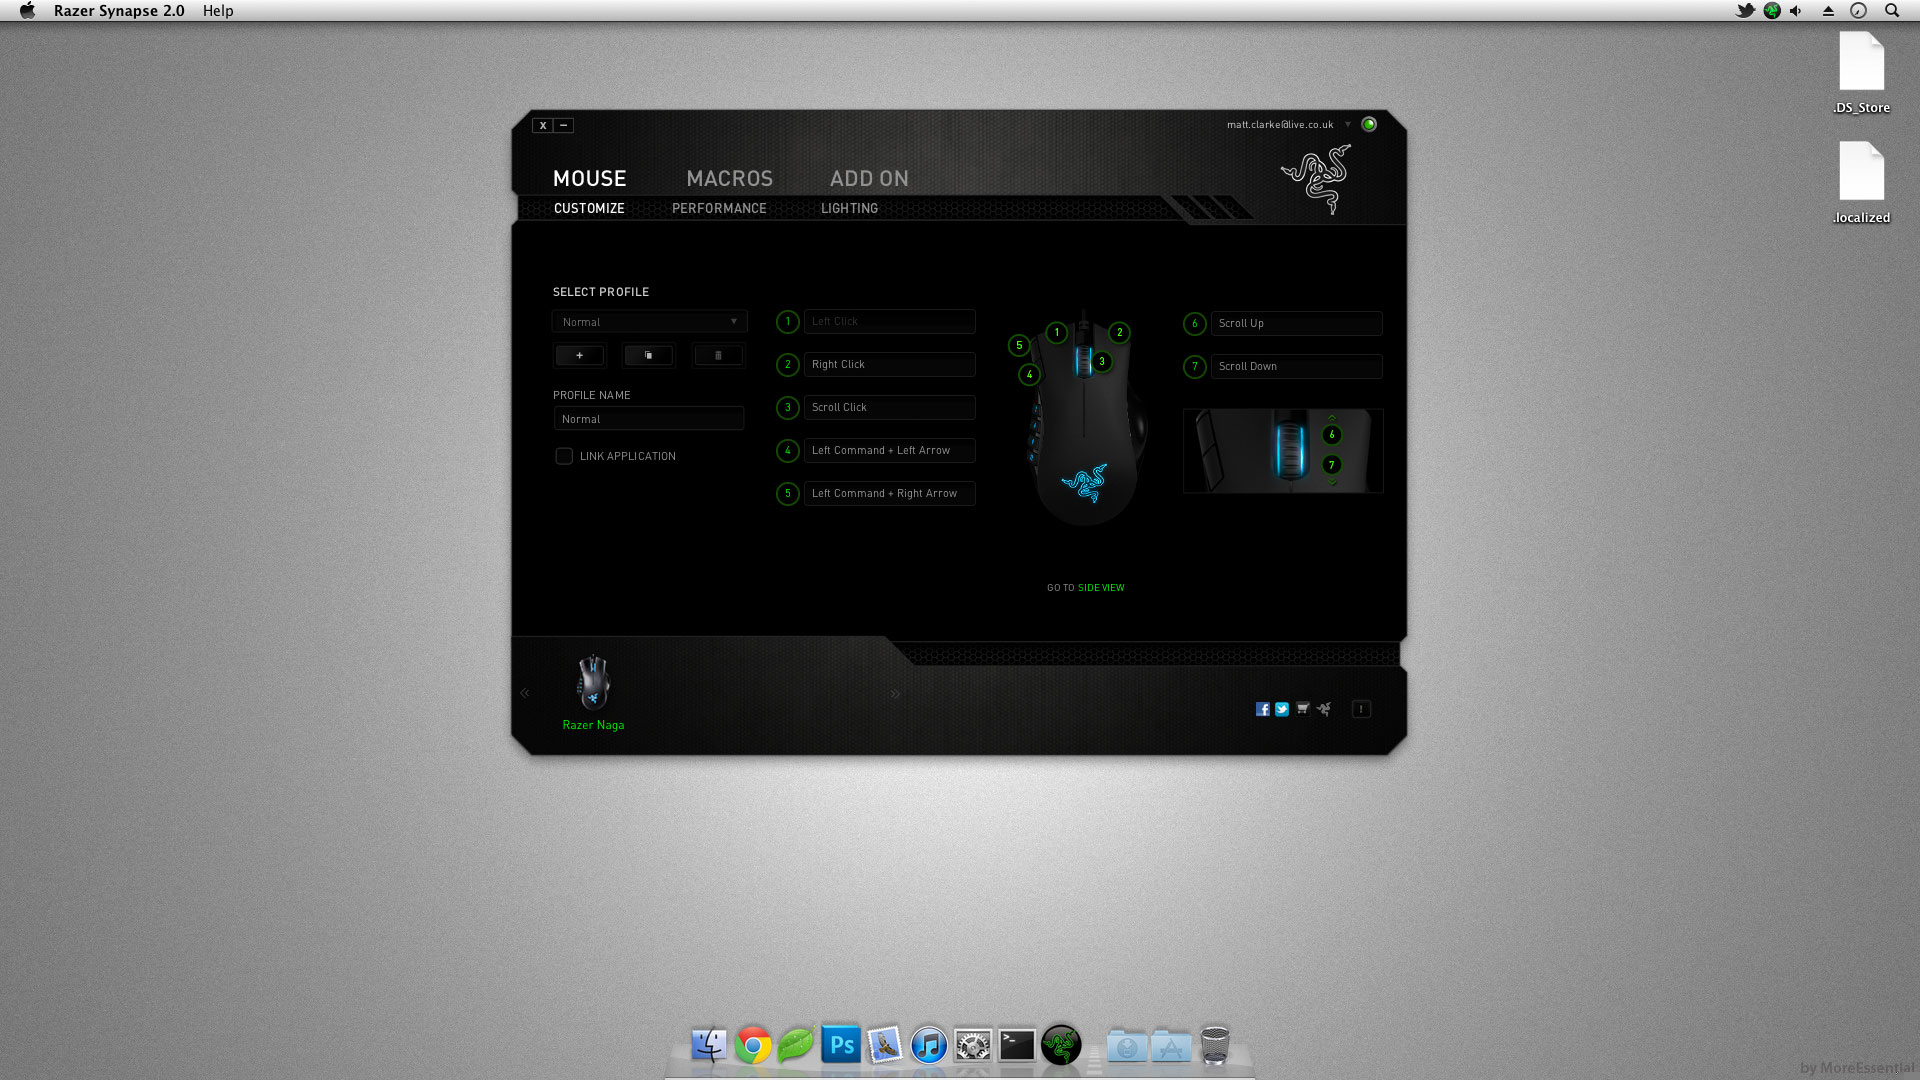 How To Download Razer Synapse On Mac